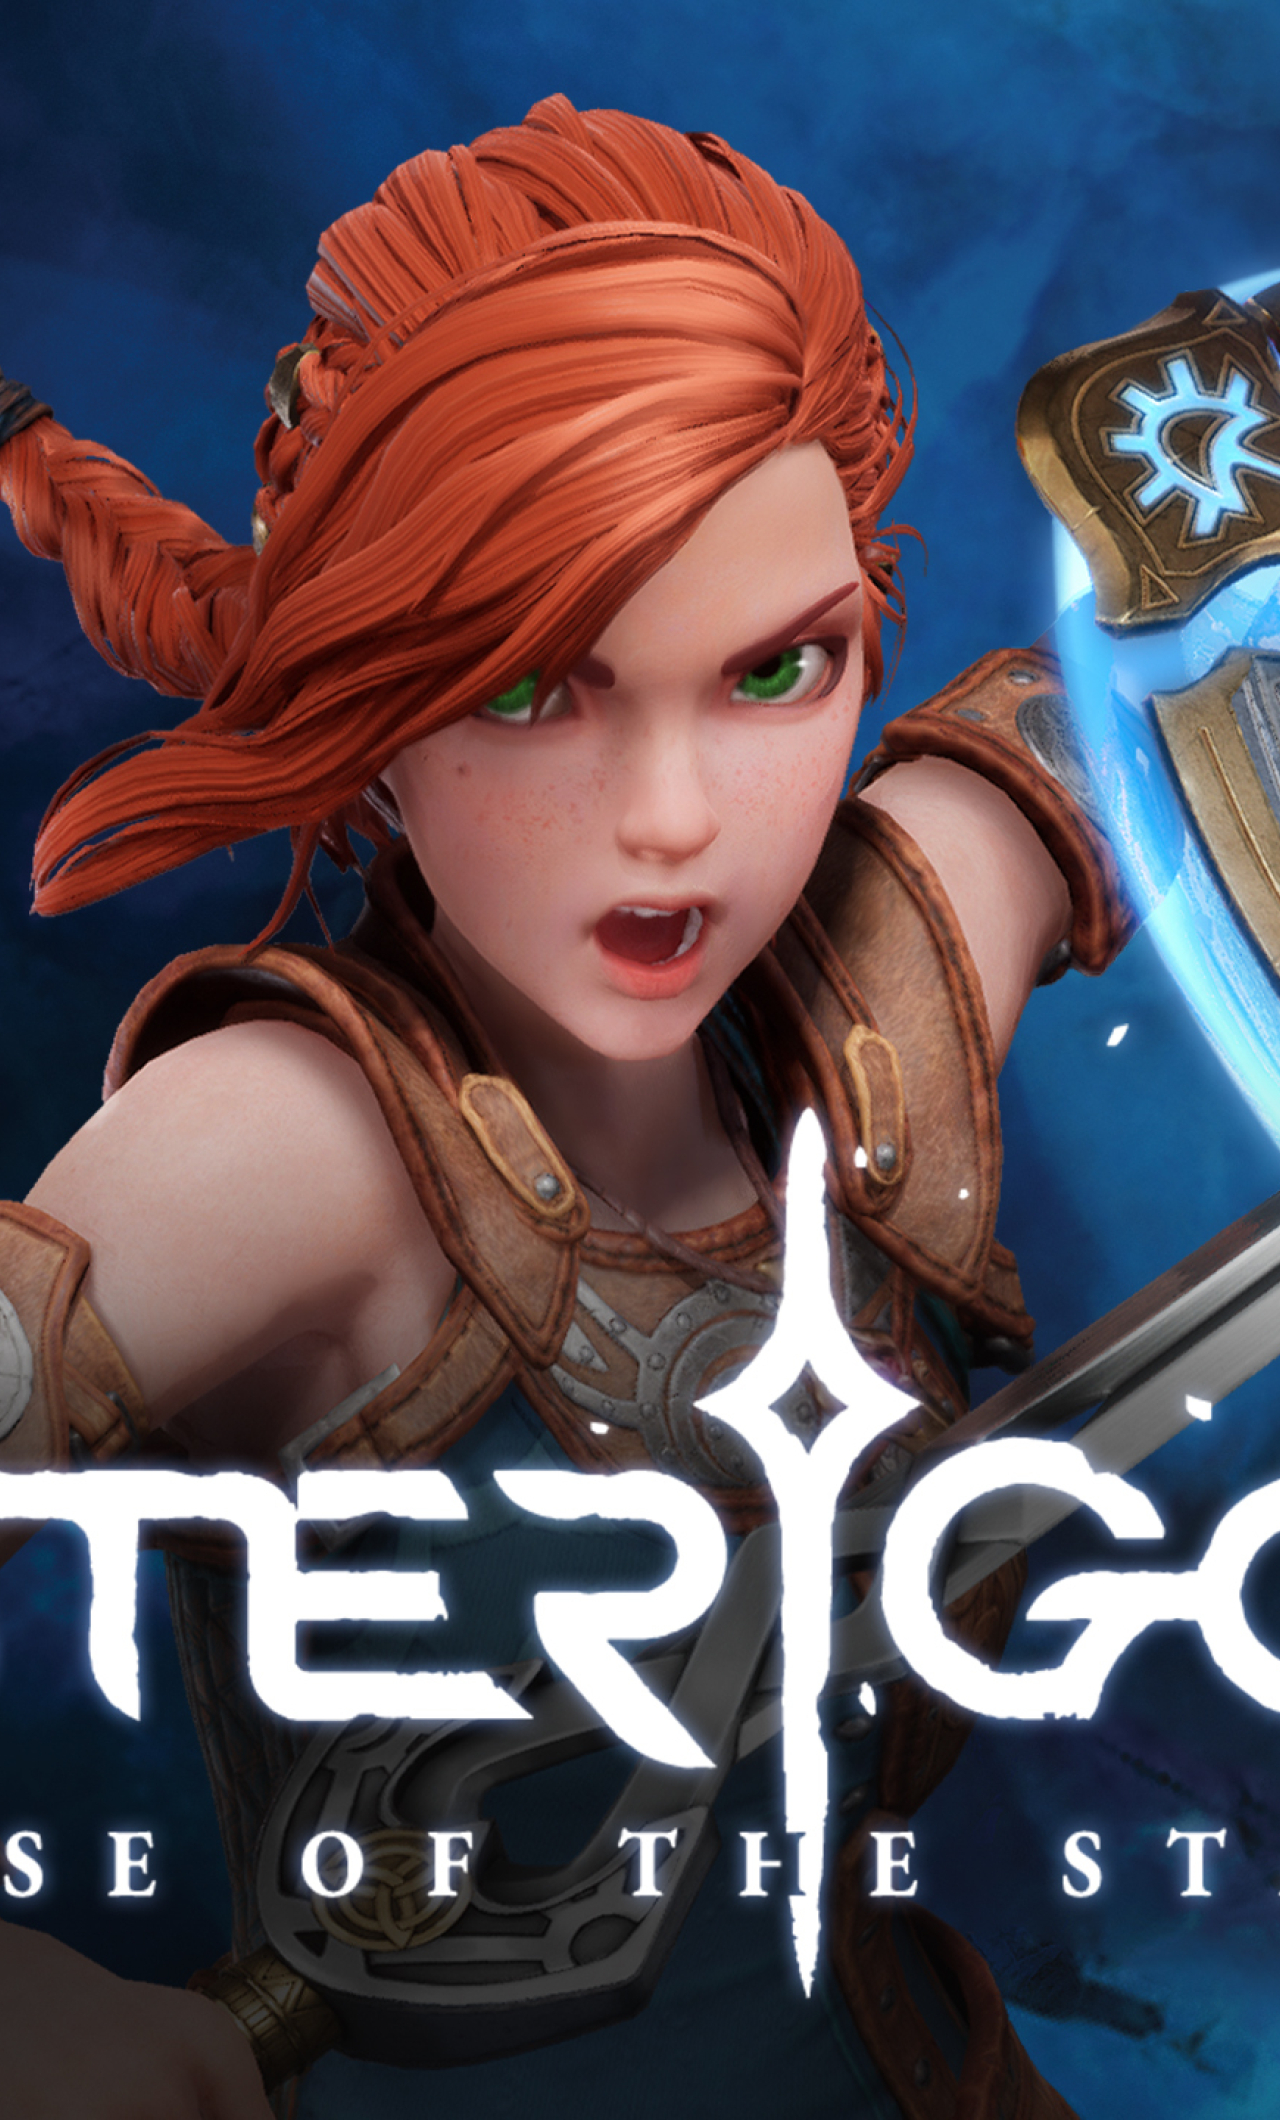 Asterigos: Curse of the Stars instal the new version for android